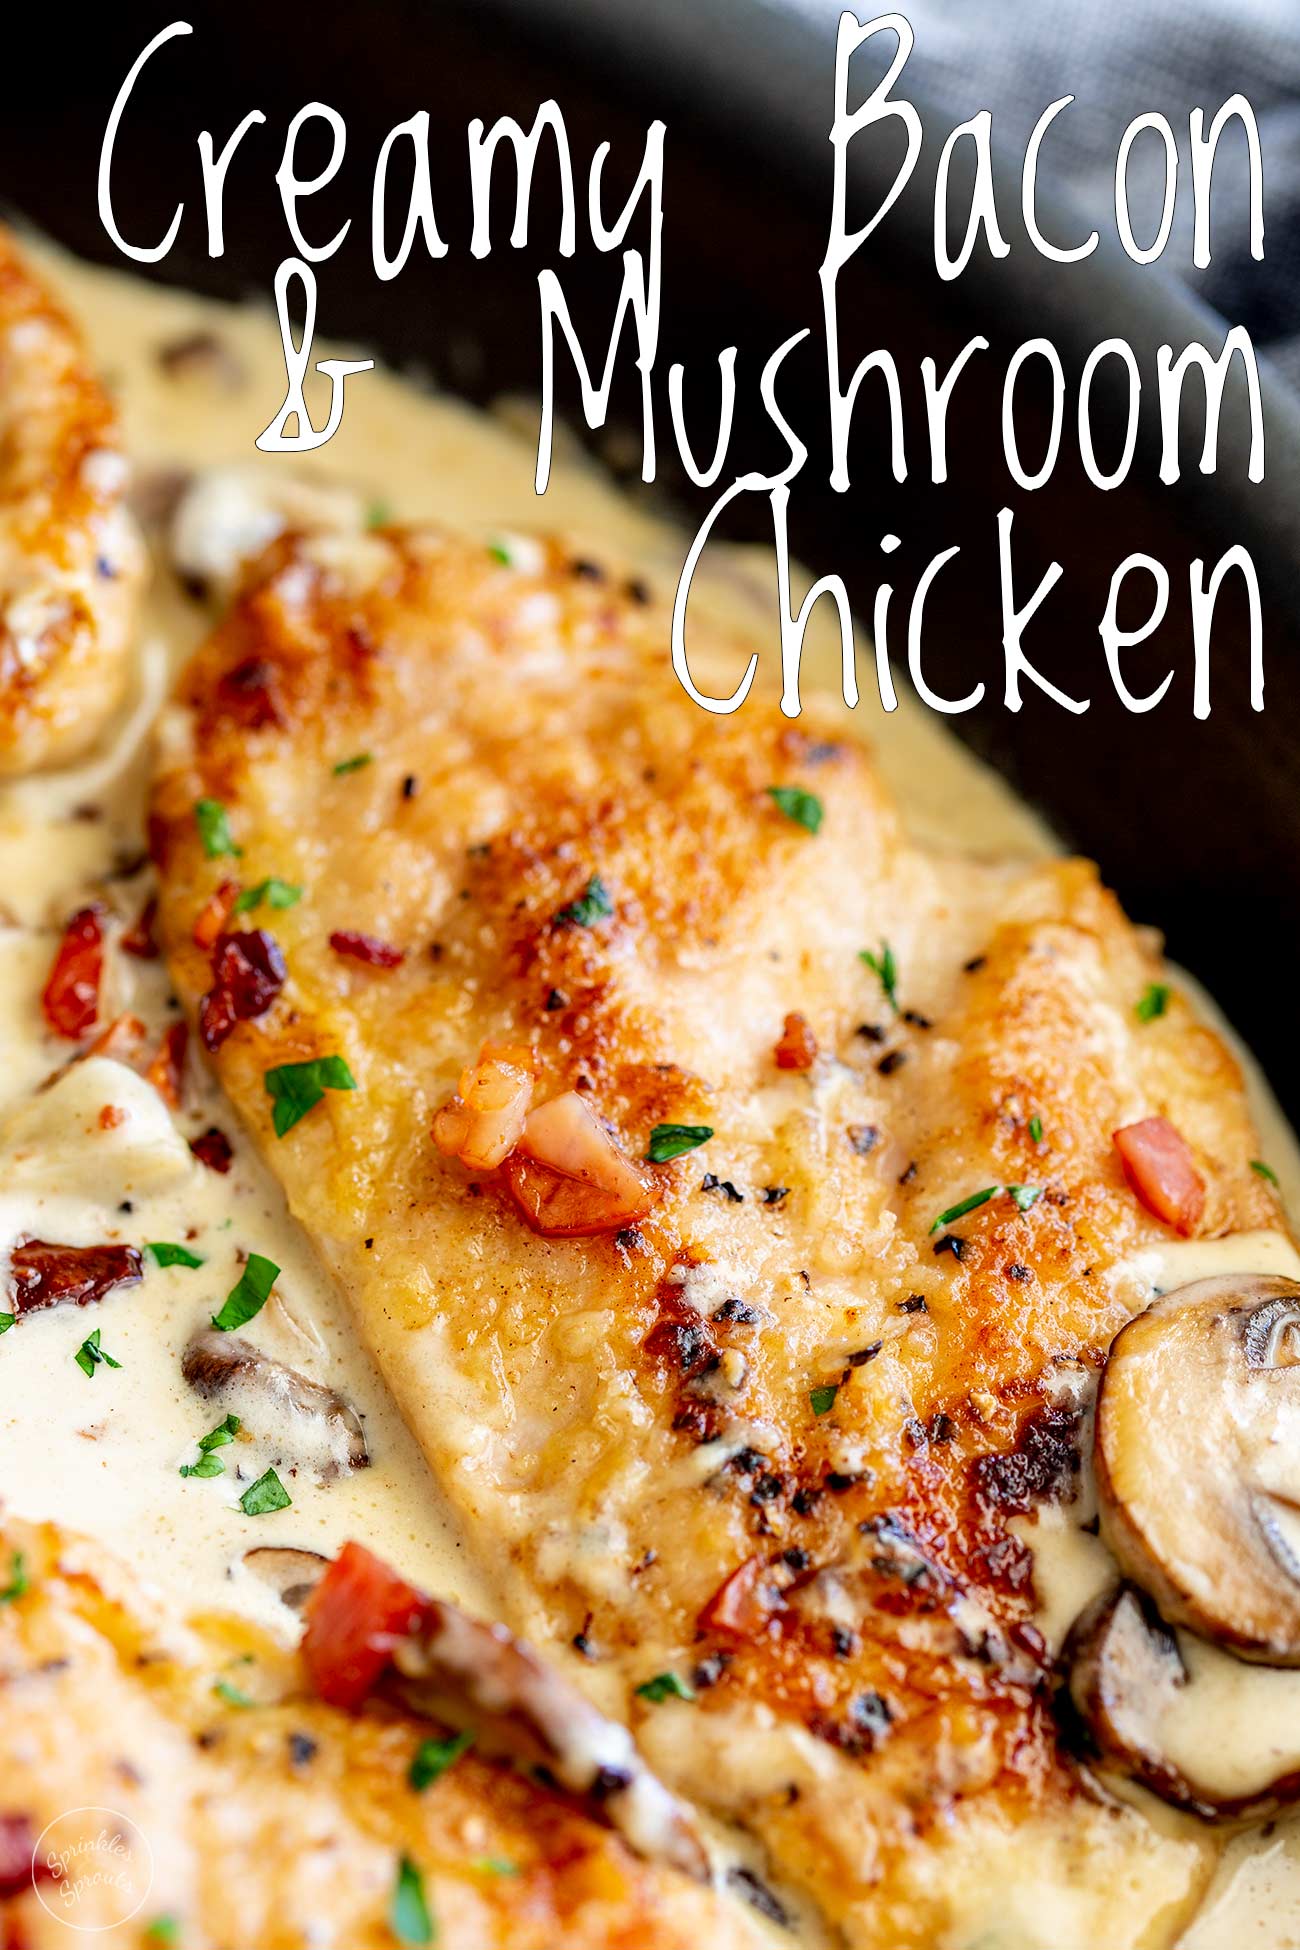 Pinterest image. Mushroom bacon chicken picture with text overlay